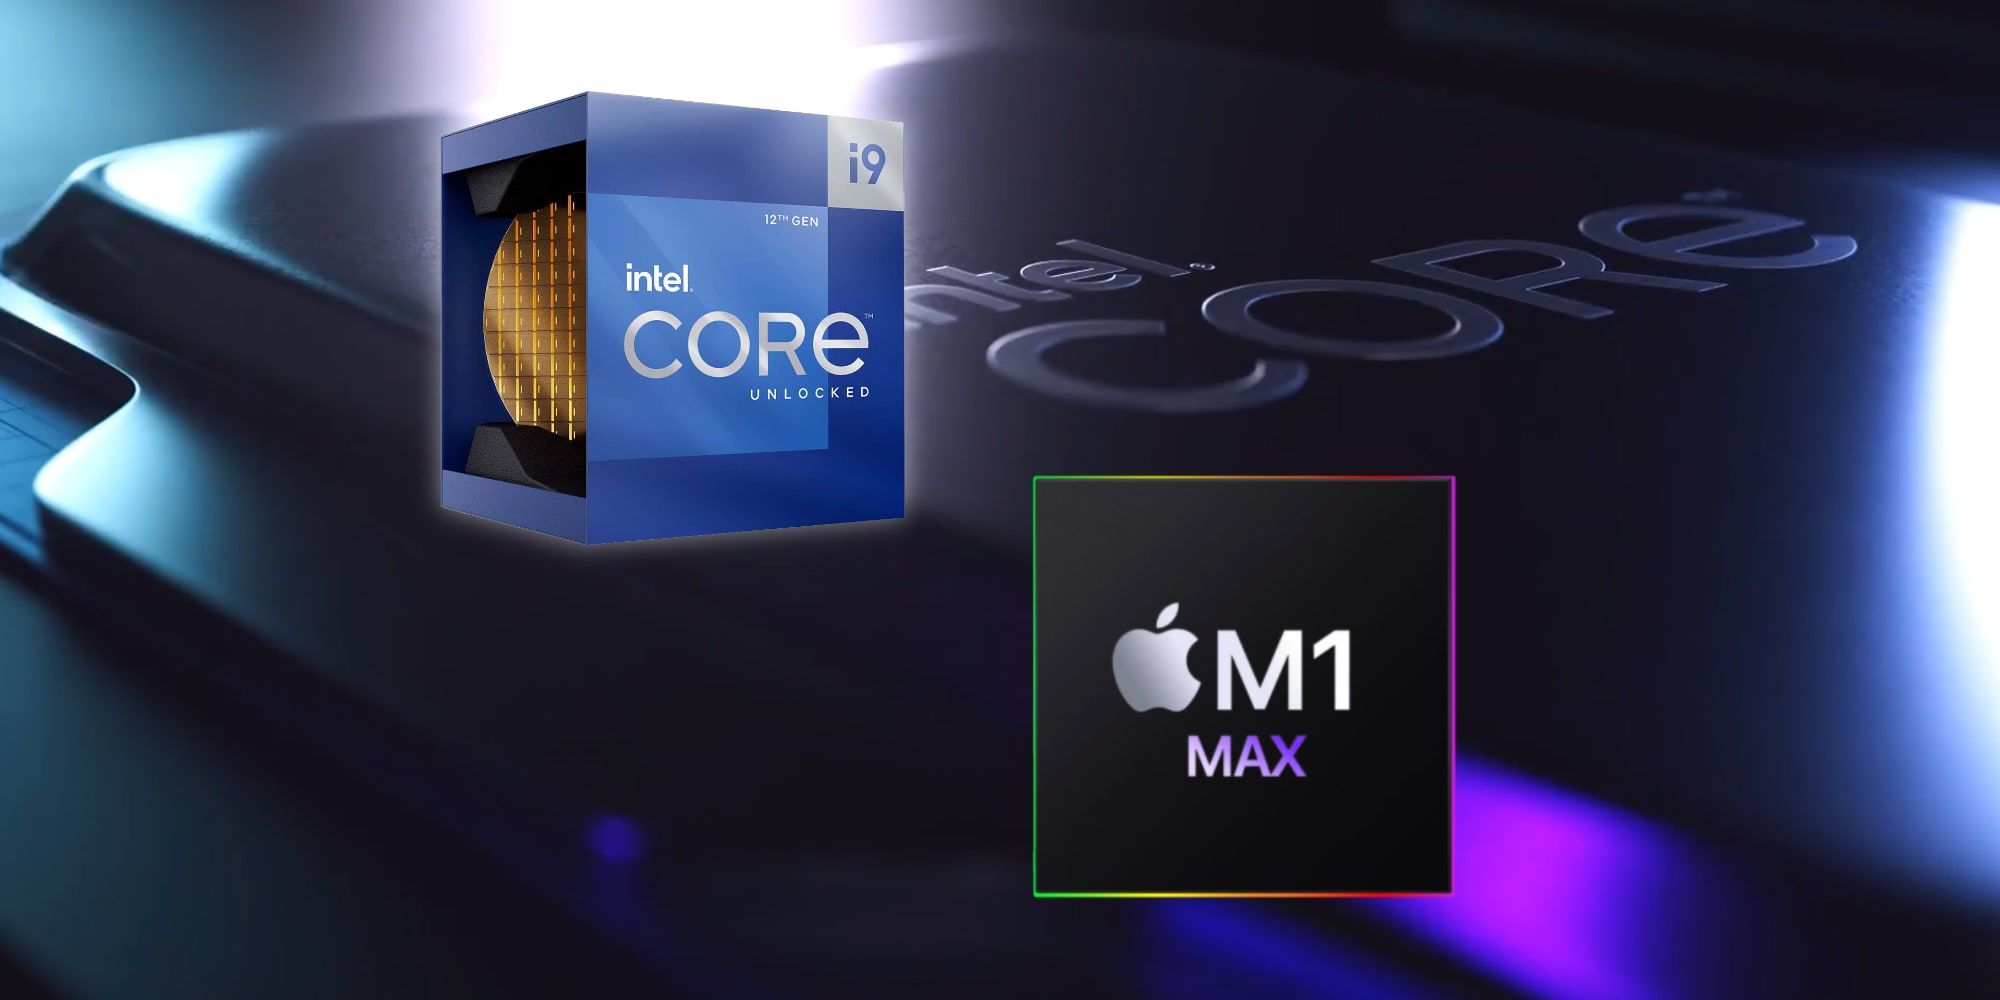 Intel Core i9 And Aple M1 Max Chips Processors